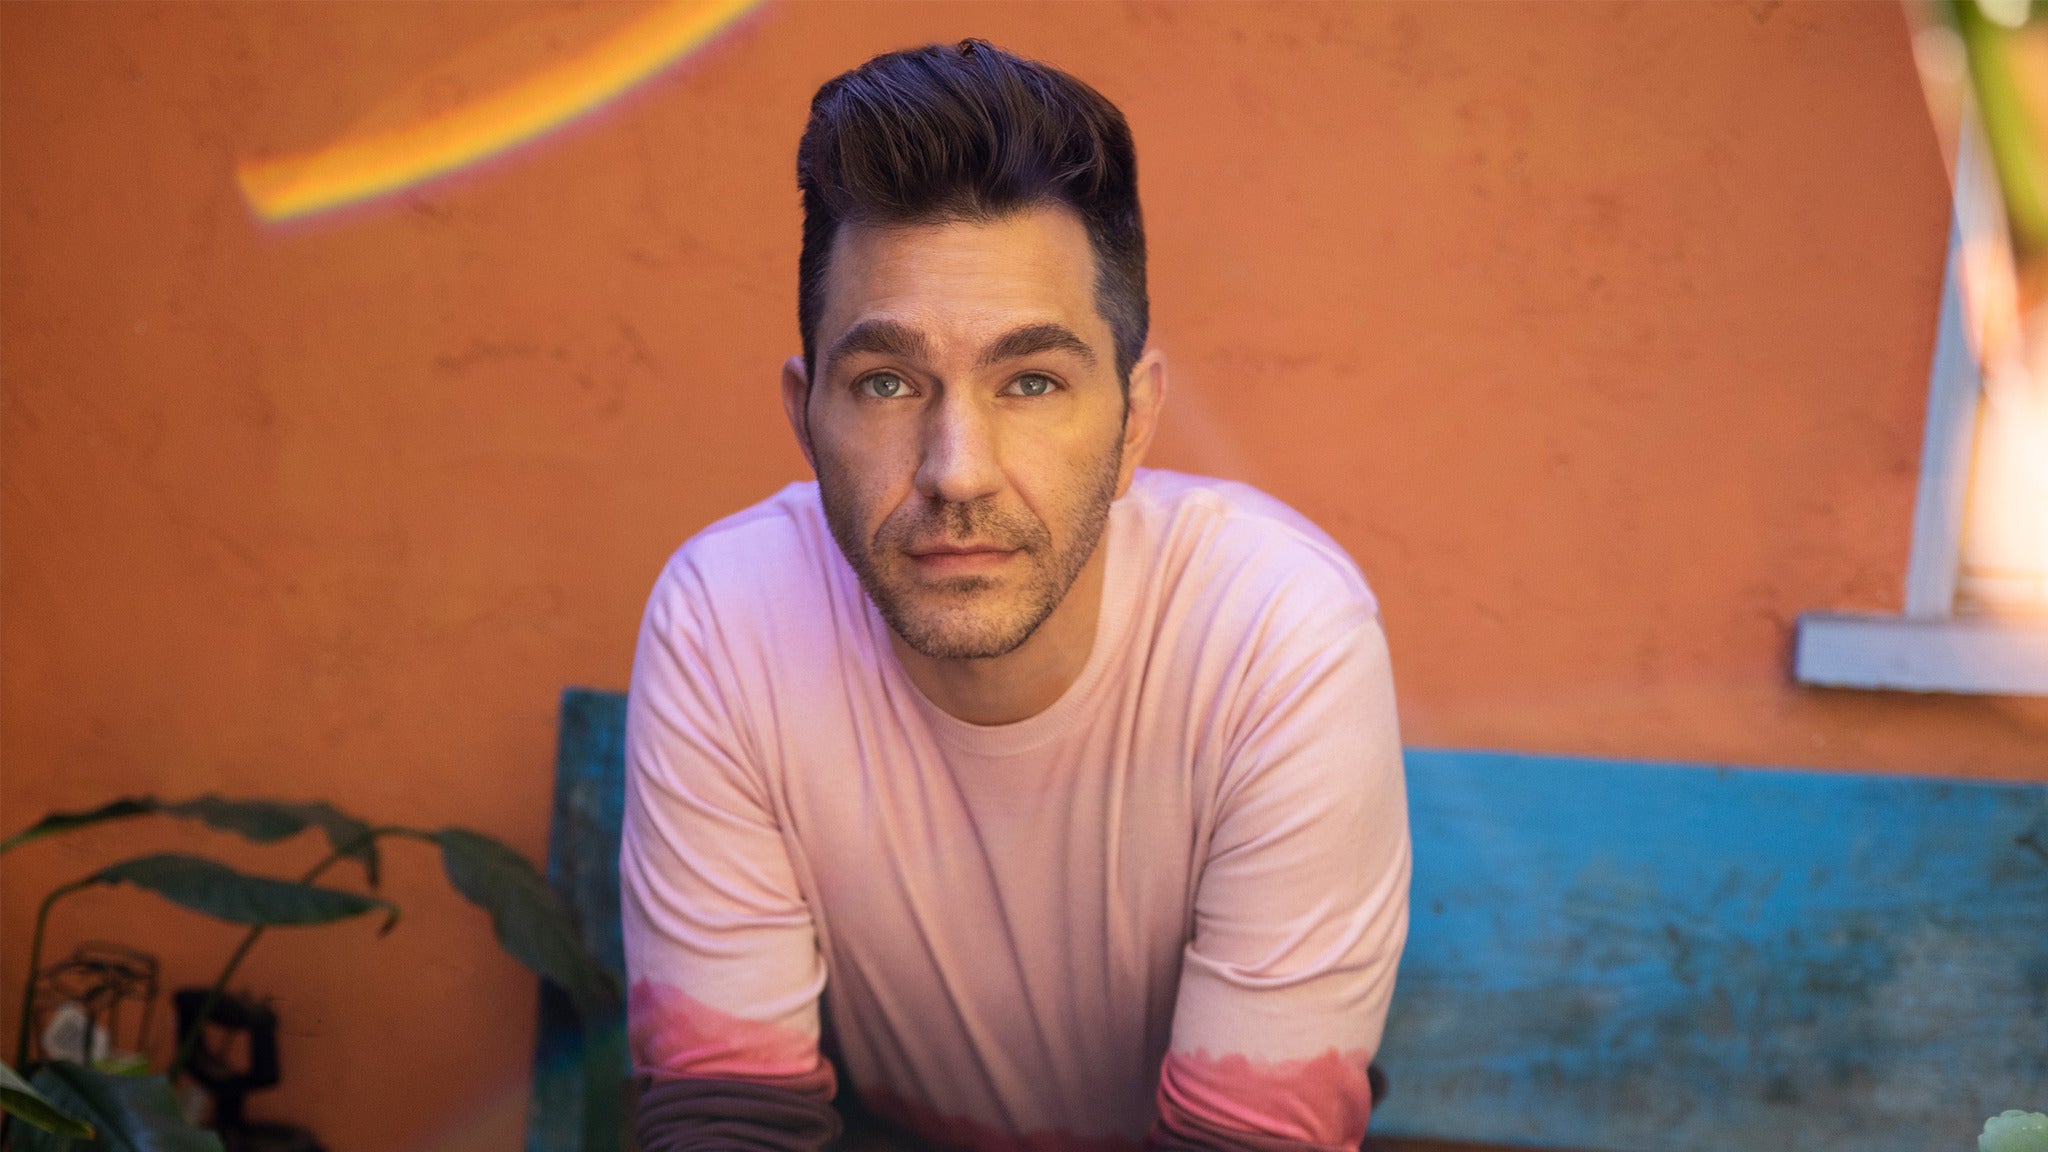 Andy Grammer at Pikes Peak Center